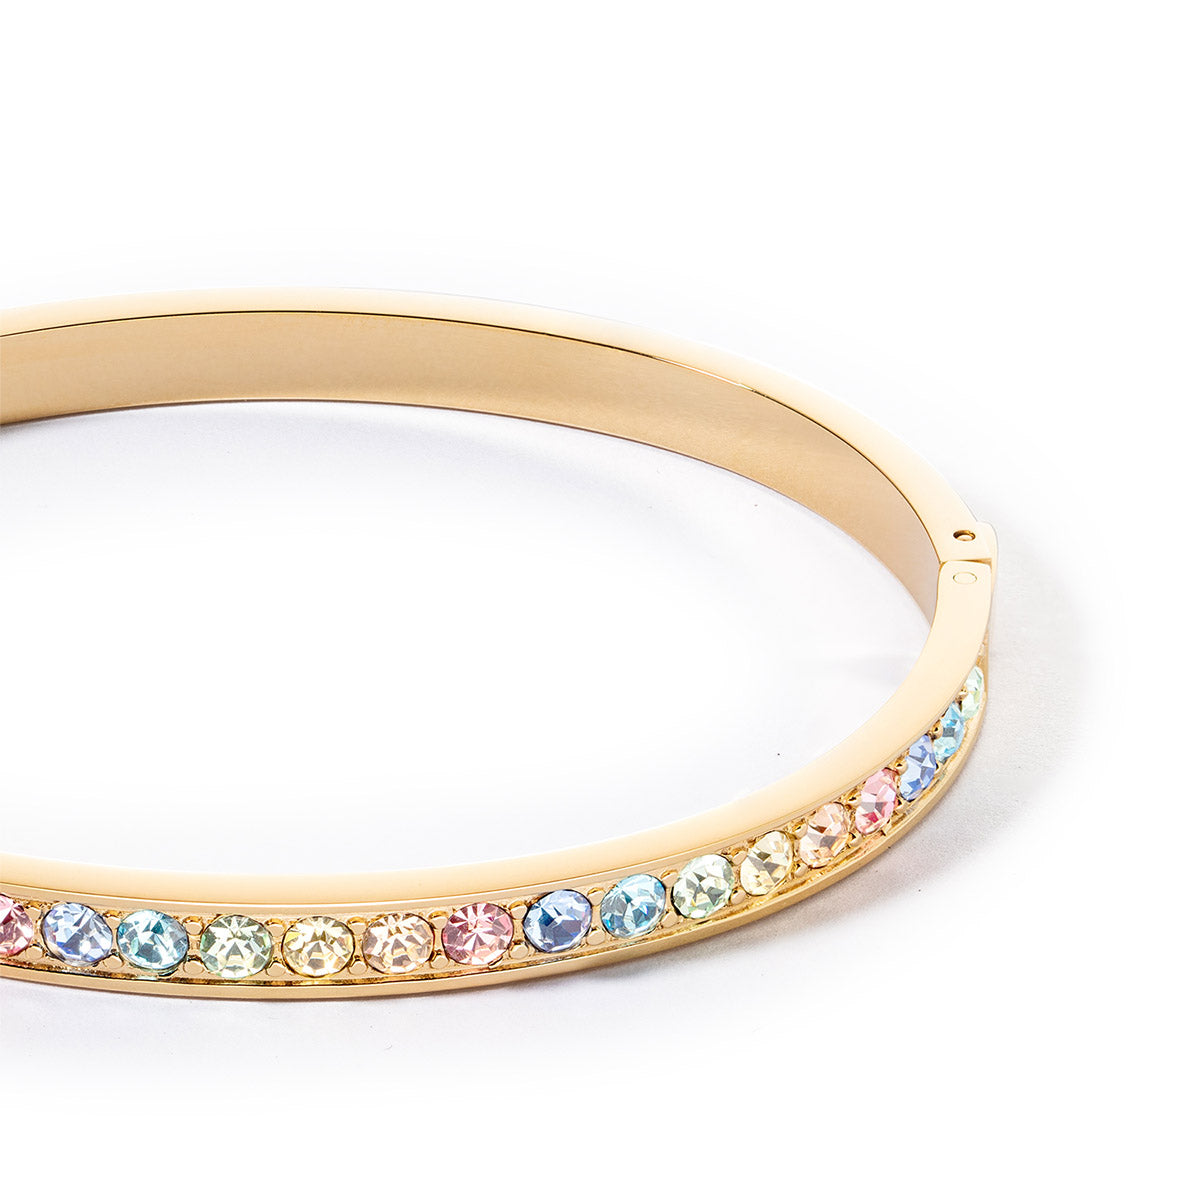 Pastel Crystal & Gold plated stainless steel bangle 0131_1590